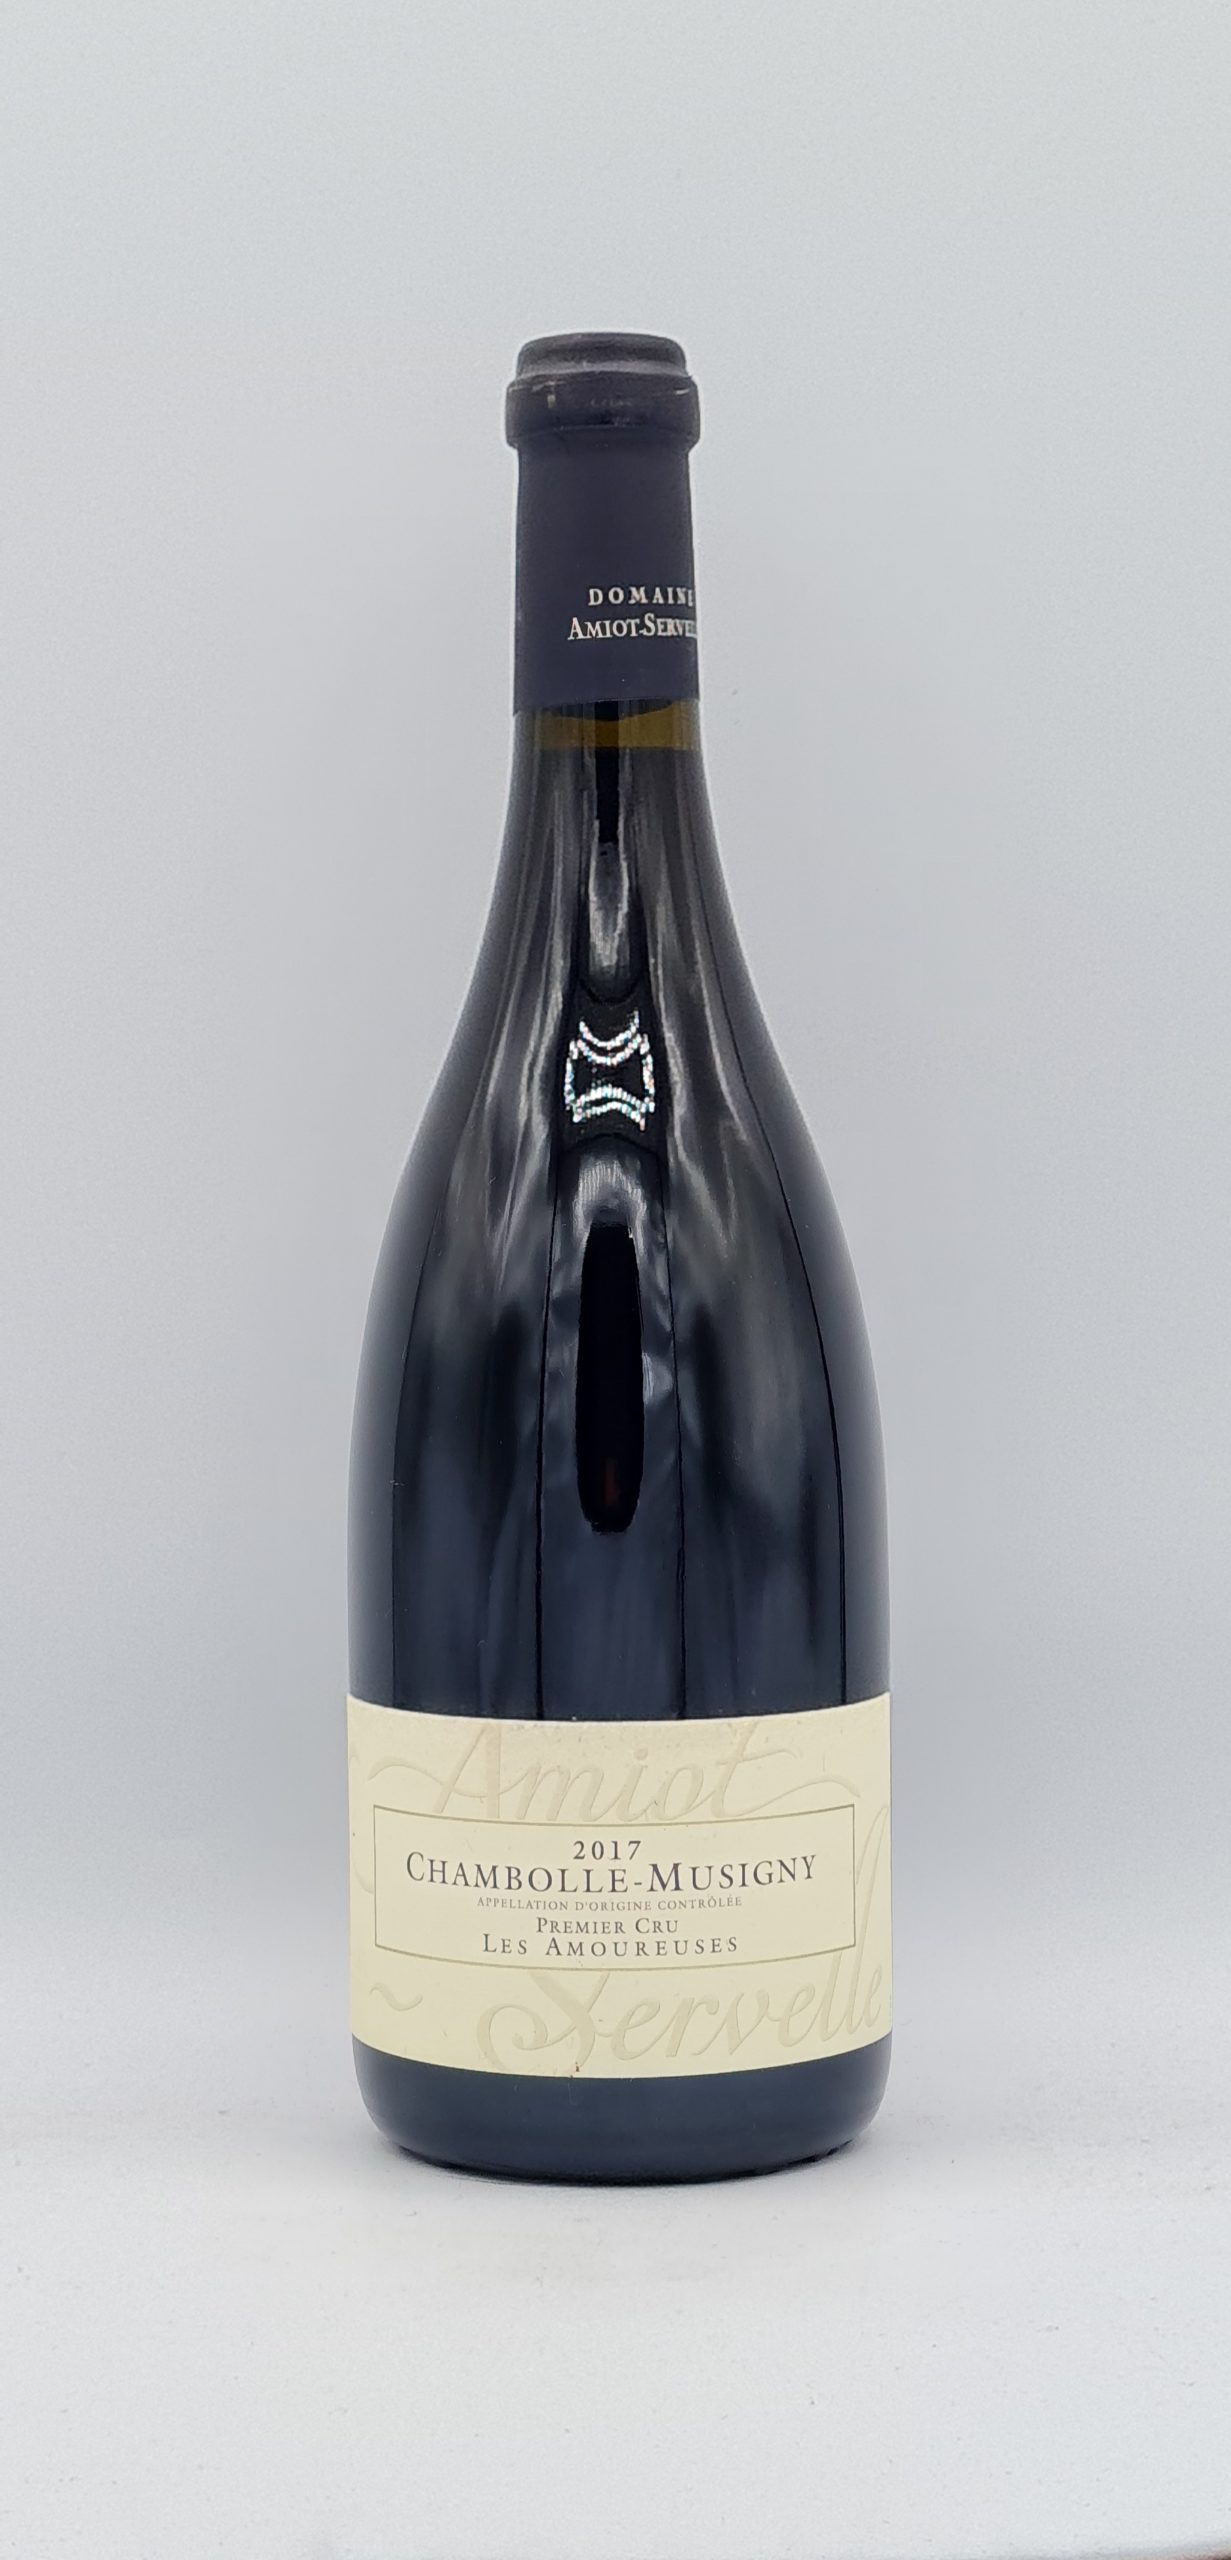 Chambolle-Musigny 1er cru “Les Amoureuses” 2017 Domaine Amiot Servelle